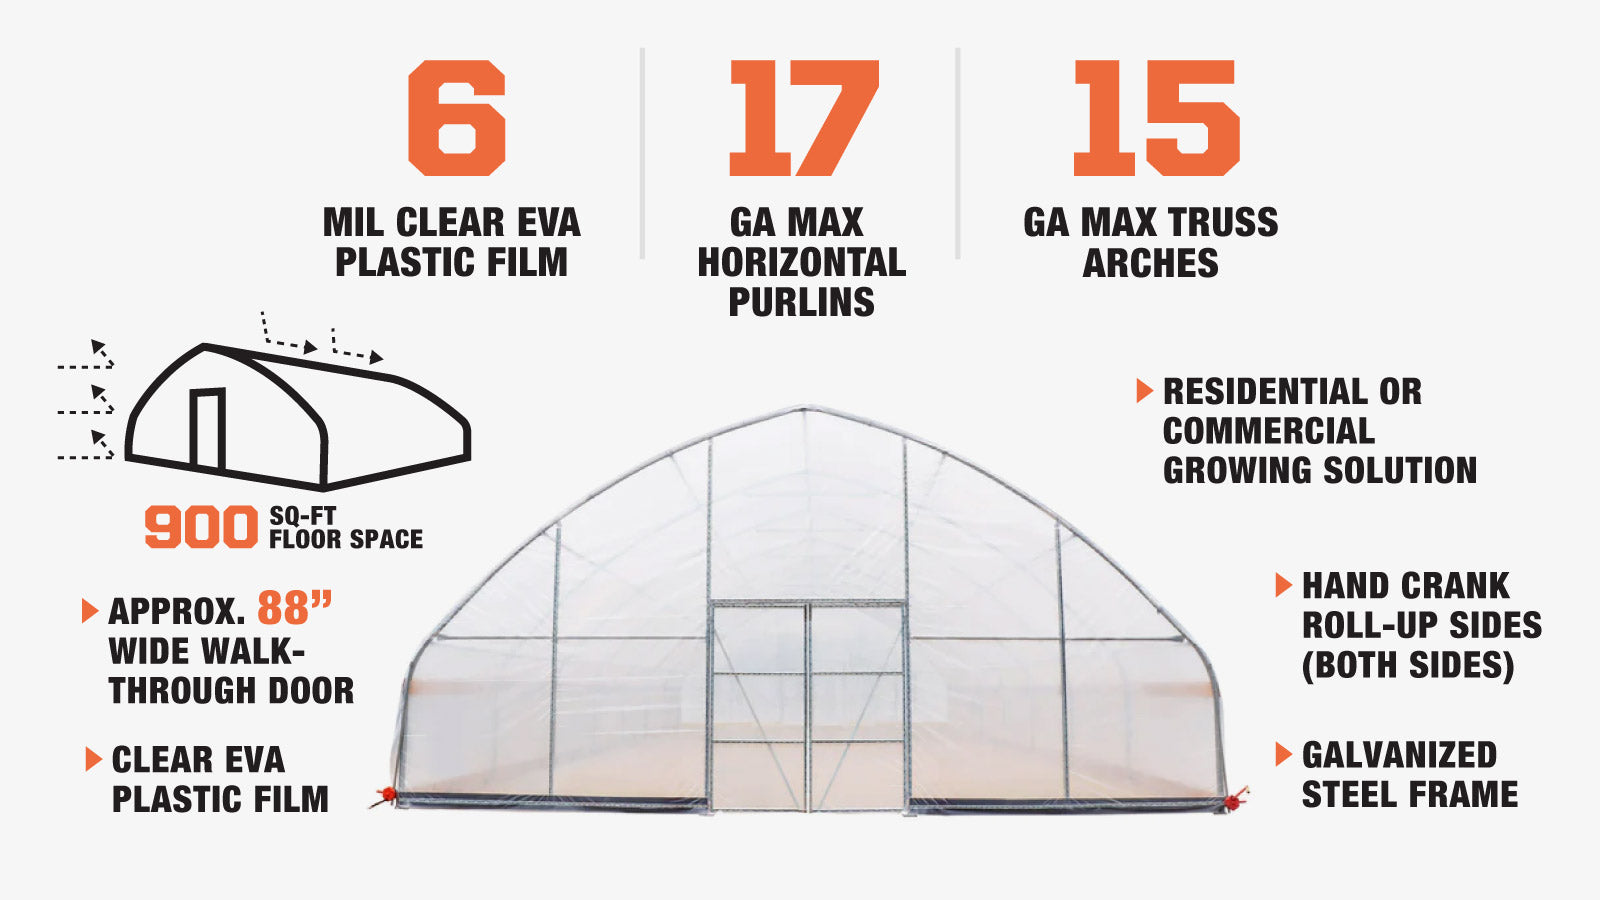 TMG Industrial 30’ x 30’ Tunnel Greenhouse Grow Tent w/6 Mil Clear EVA Plastic Film, Cold Frame, Hand Crank Roll-Up Sides, Peak Ceiling Roof, TMG-GH3030-description-image